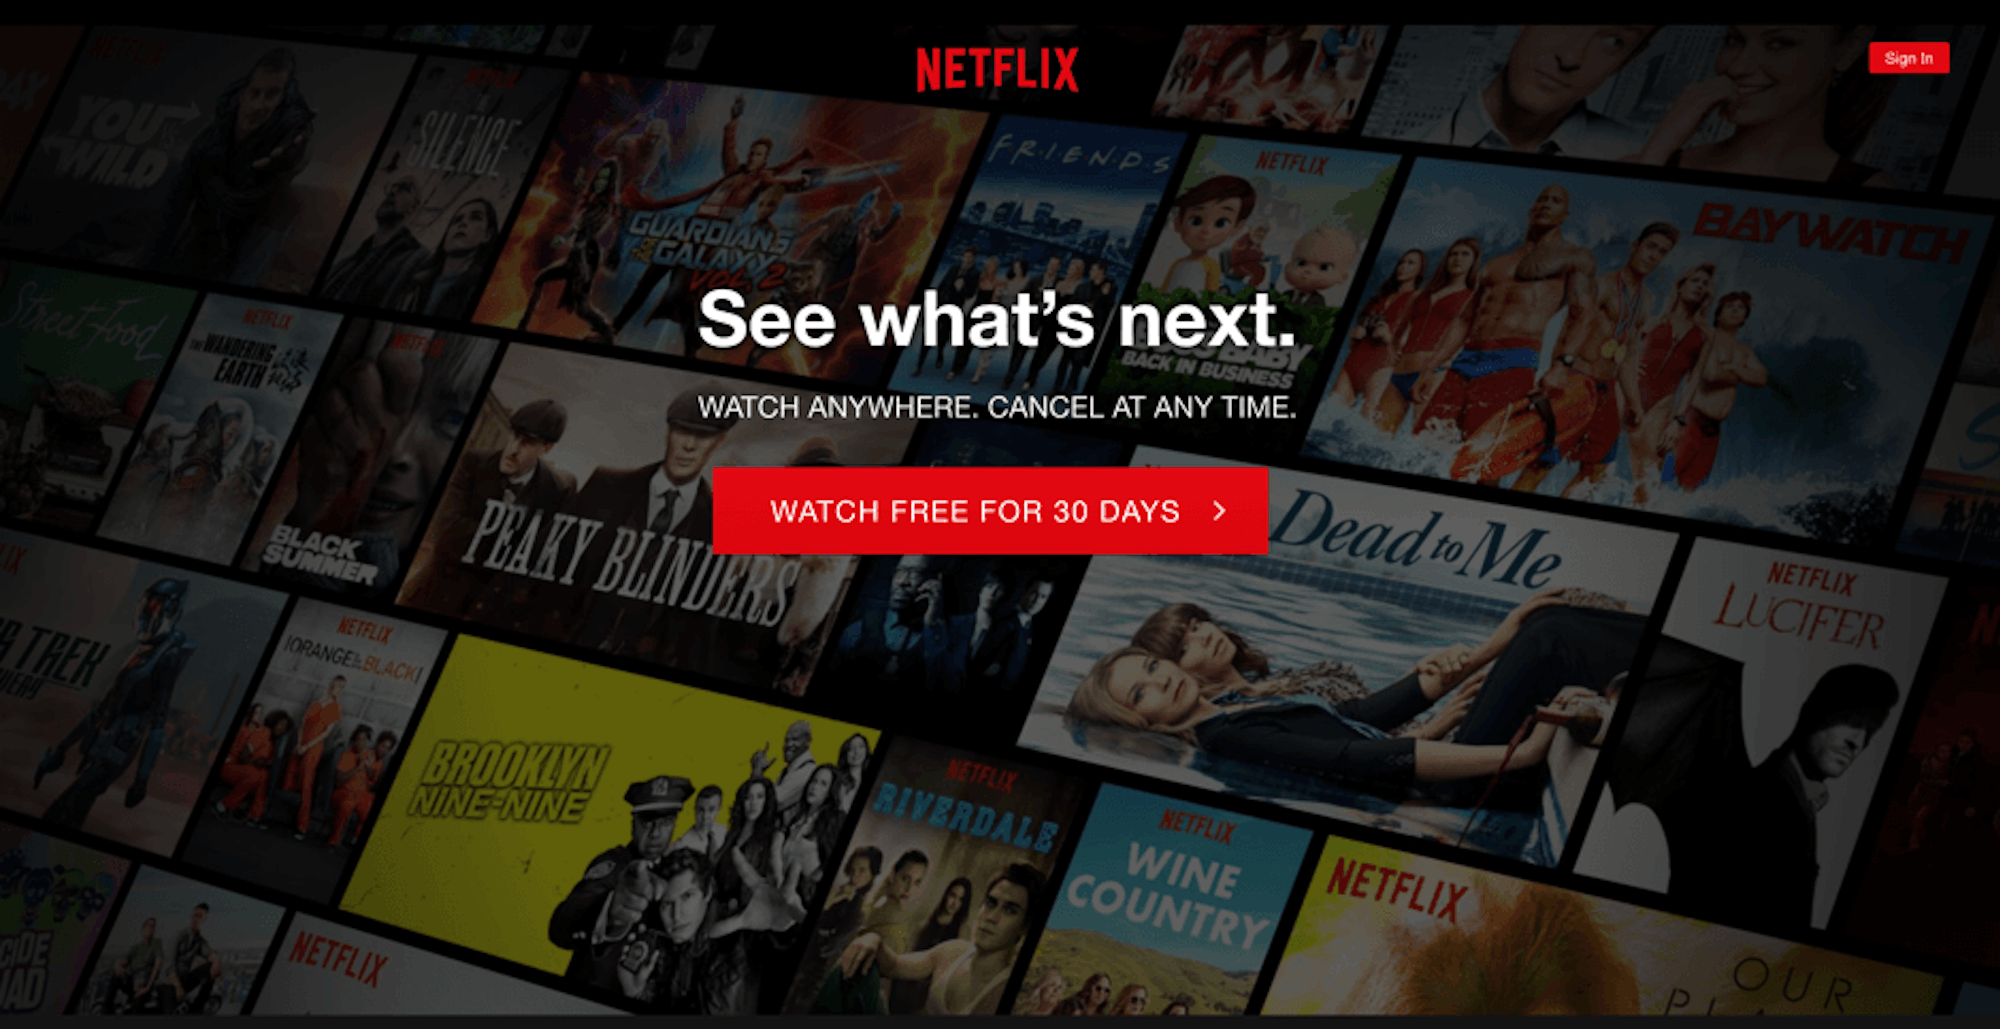 Netflix's home page. Shows a fantastic example of a thoughtful CTA.